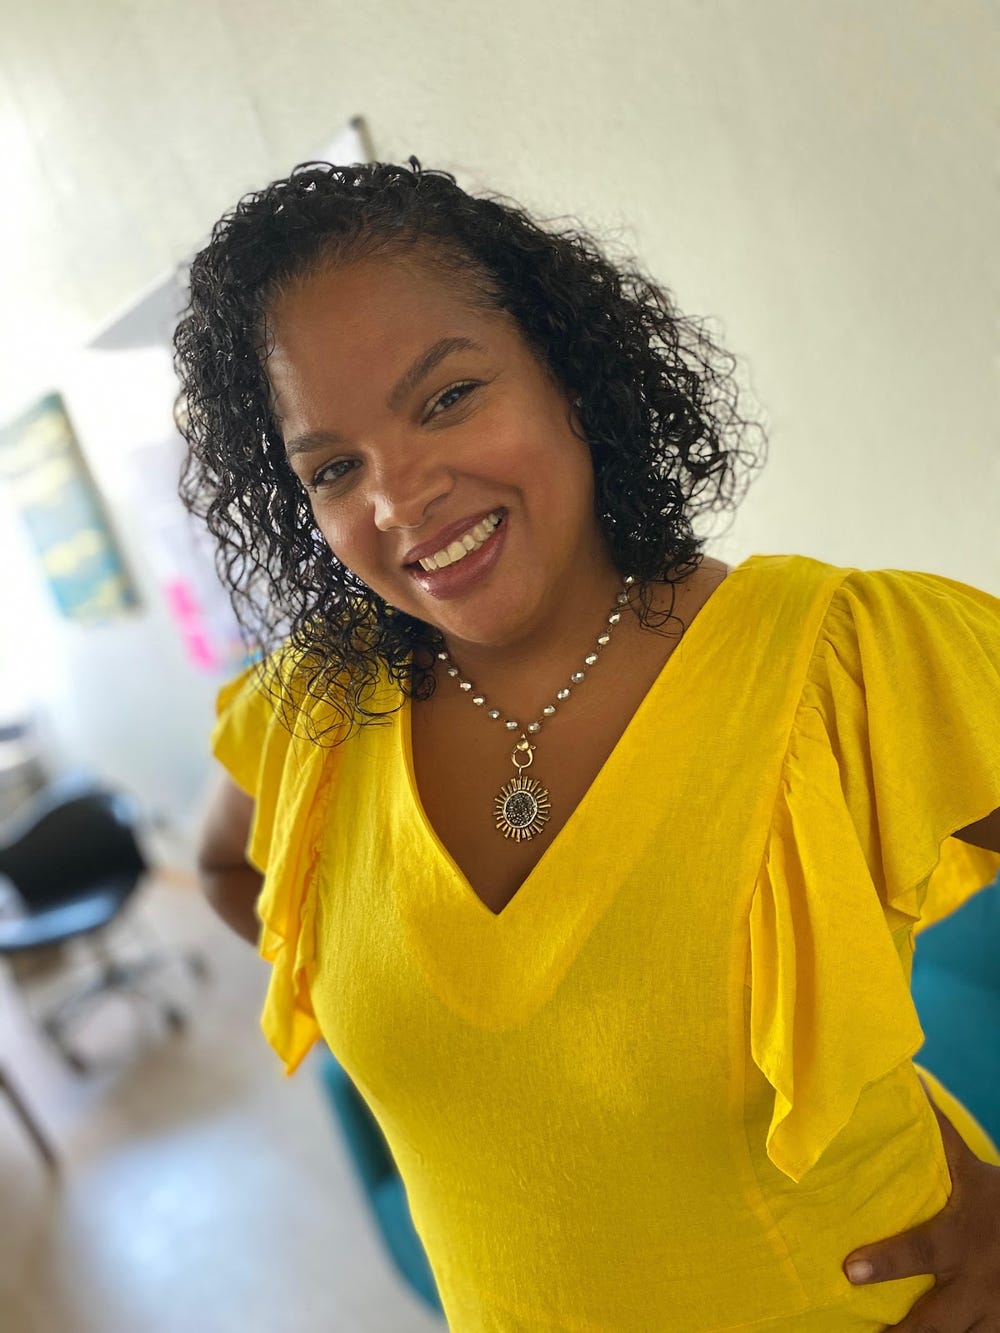 Black woman in a yellow shirt smiling